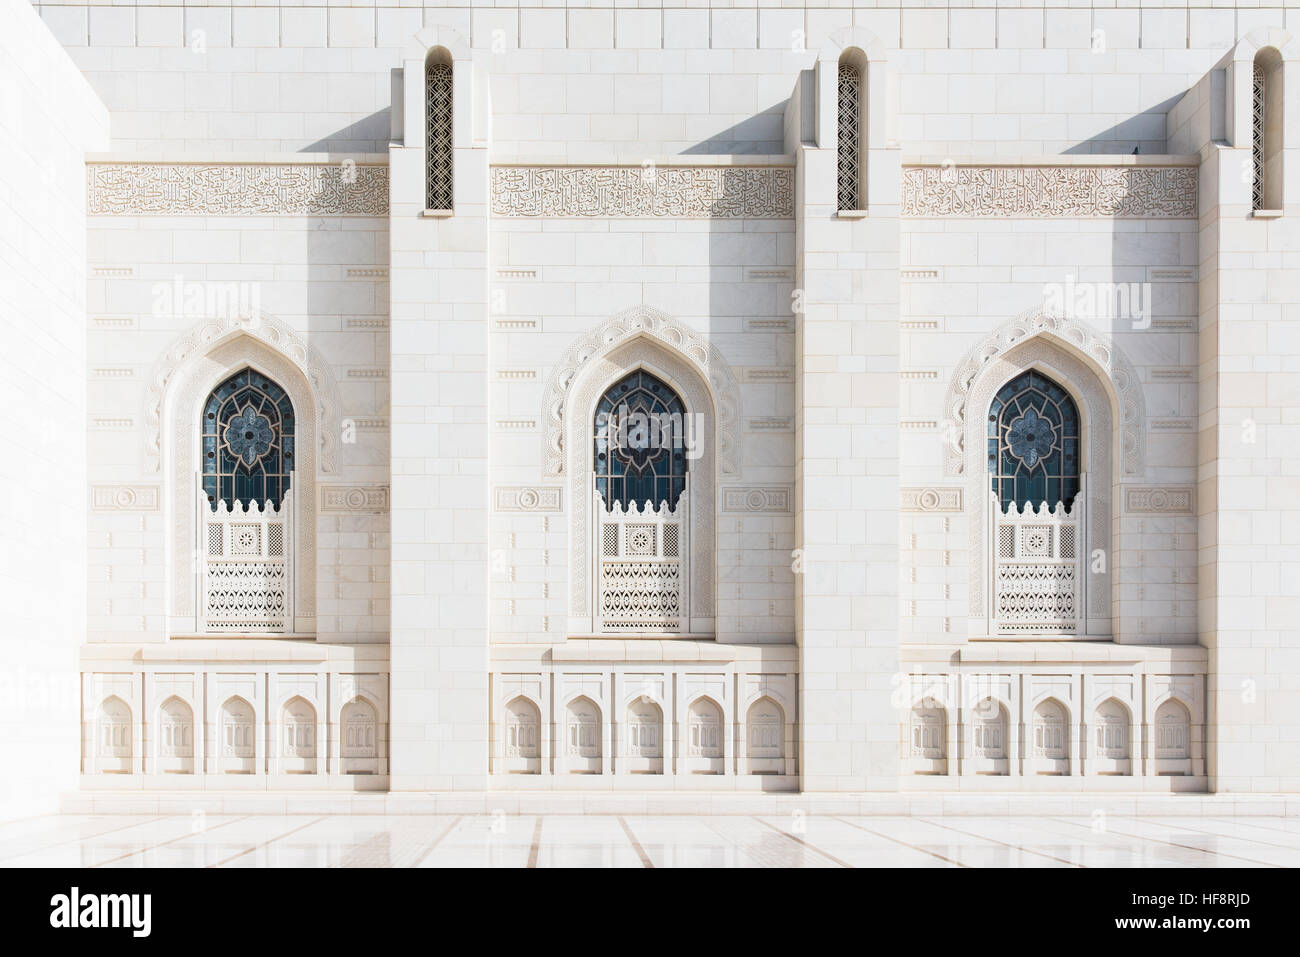 Exterior detail of the Sultan Qaboos Grand Mosque in Muscat, the main mosque of The Sultanate of Oman. Stock Photo